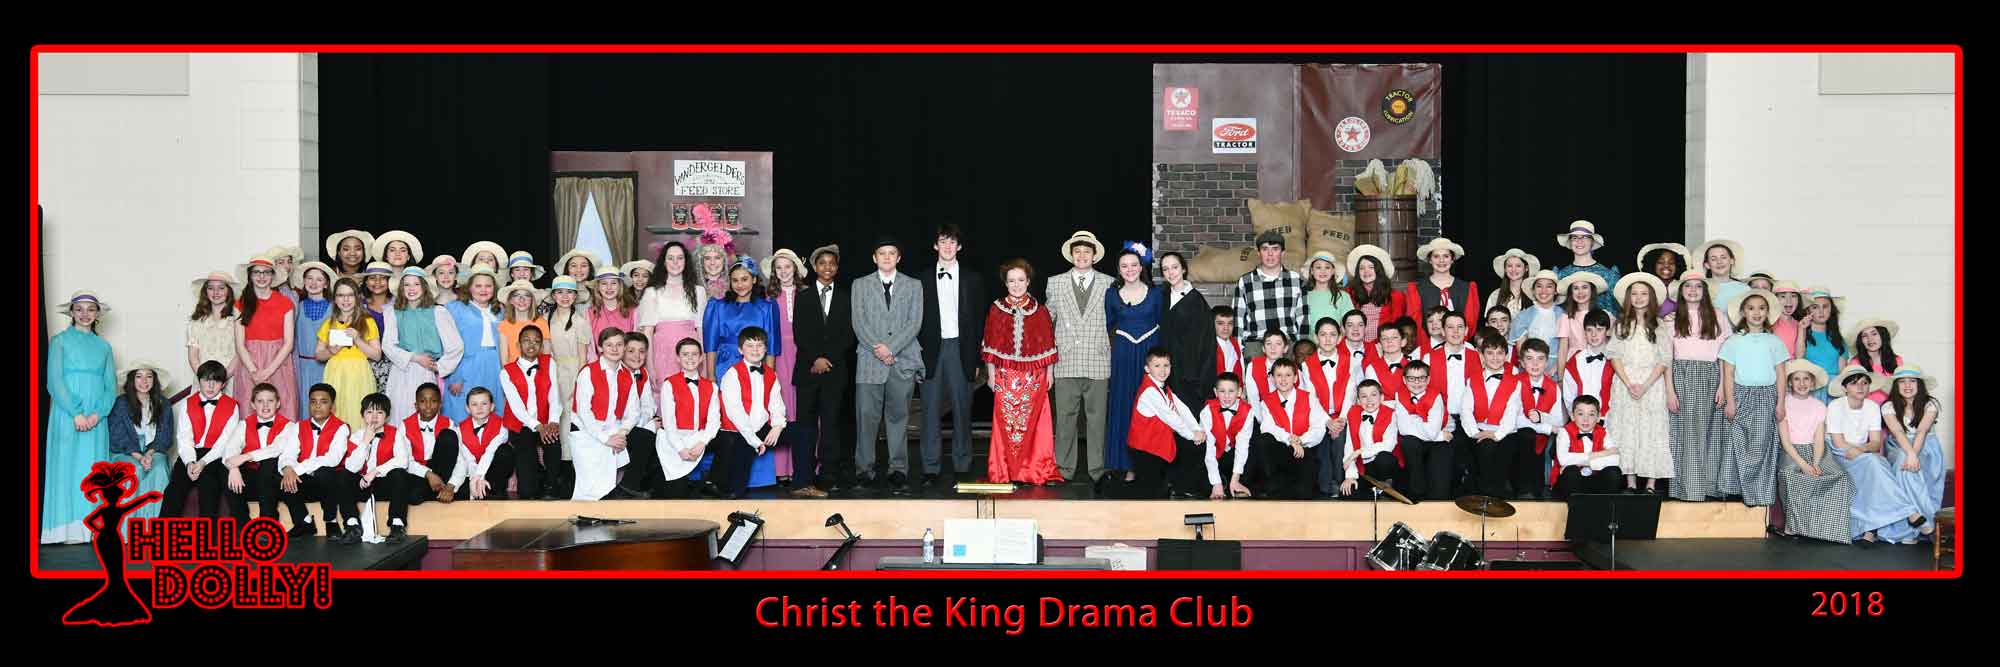 Christ the King Hello Dolly Theater Group Photo by Tom Killoran